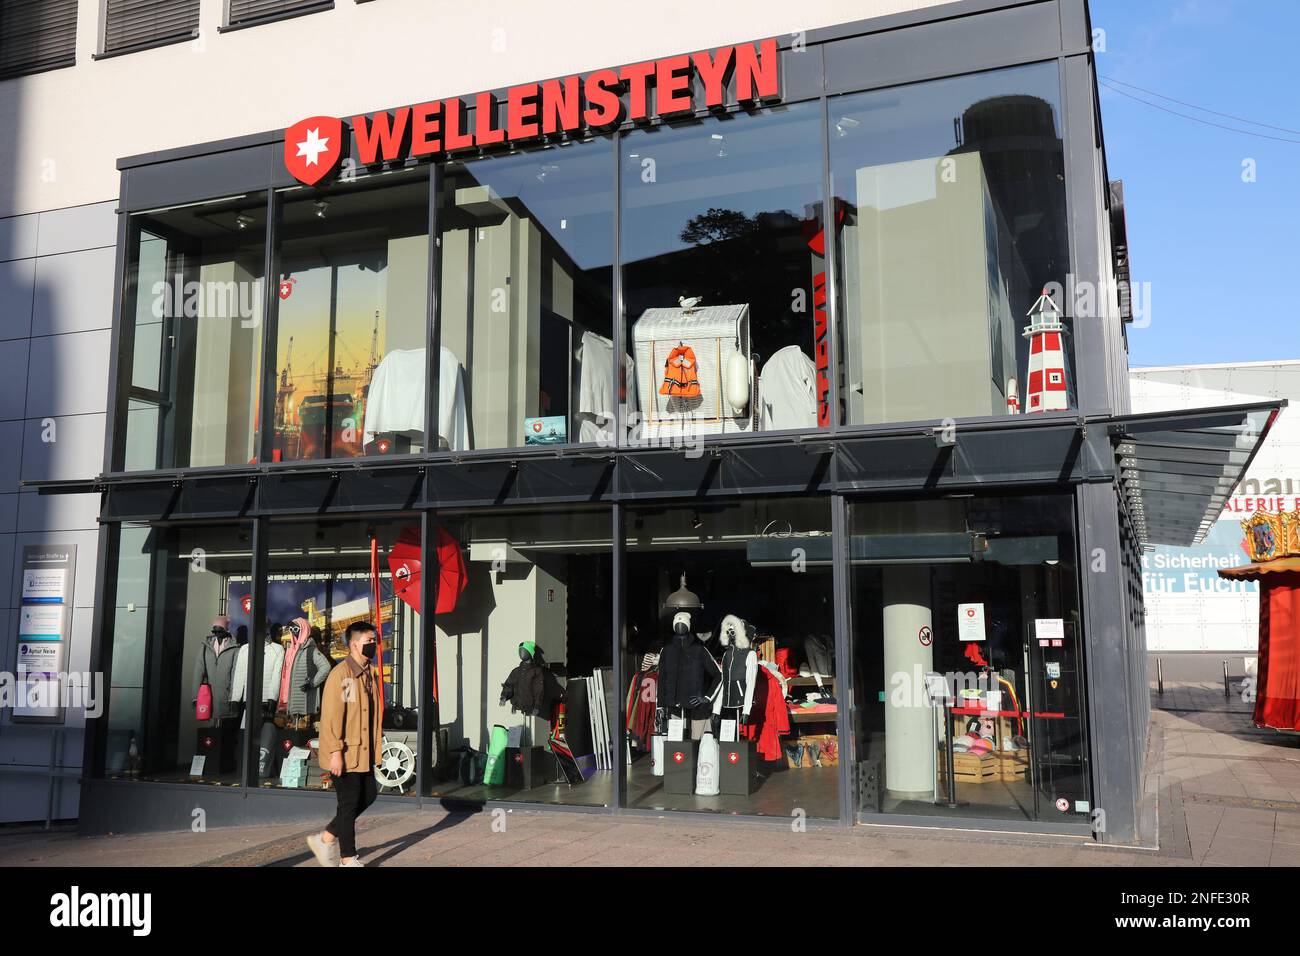 ESSEN, GERMANY - SEPTEMBER 20, 2020: Wellensteyn fashion store street view  in Essen, Germany. Wellensteyn is a German clothes company founded in 1940s  Stock Photo - Alamy